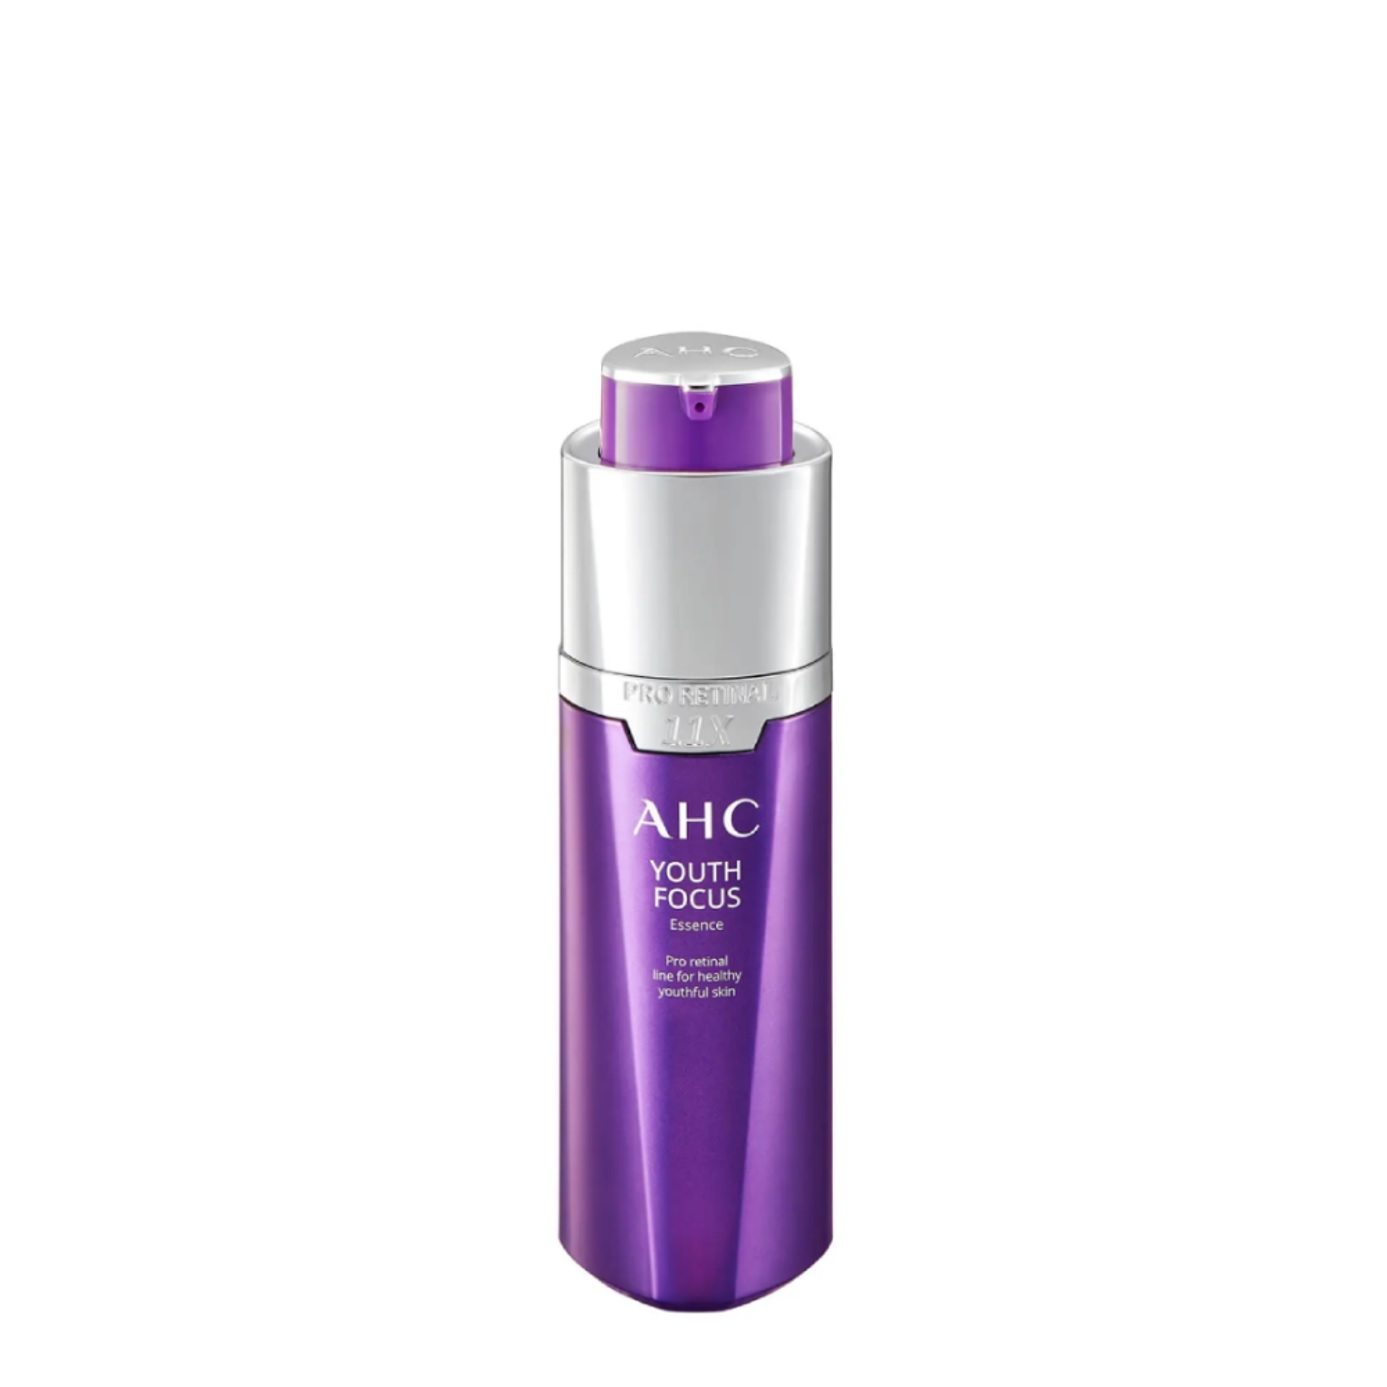 Thiết kế của AHC Youth Focus Essence